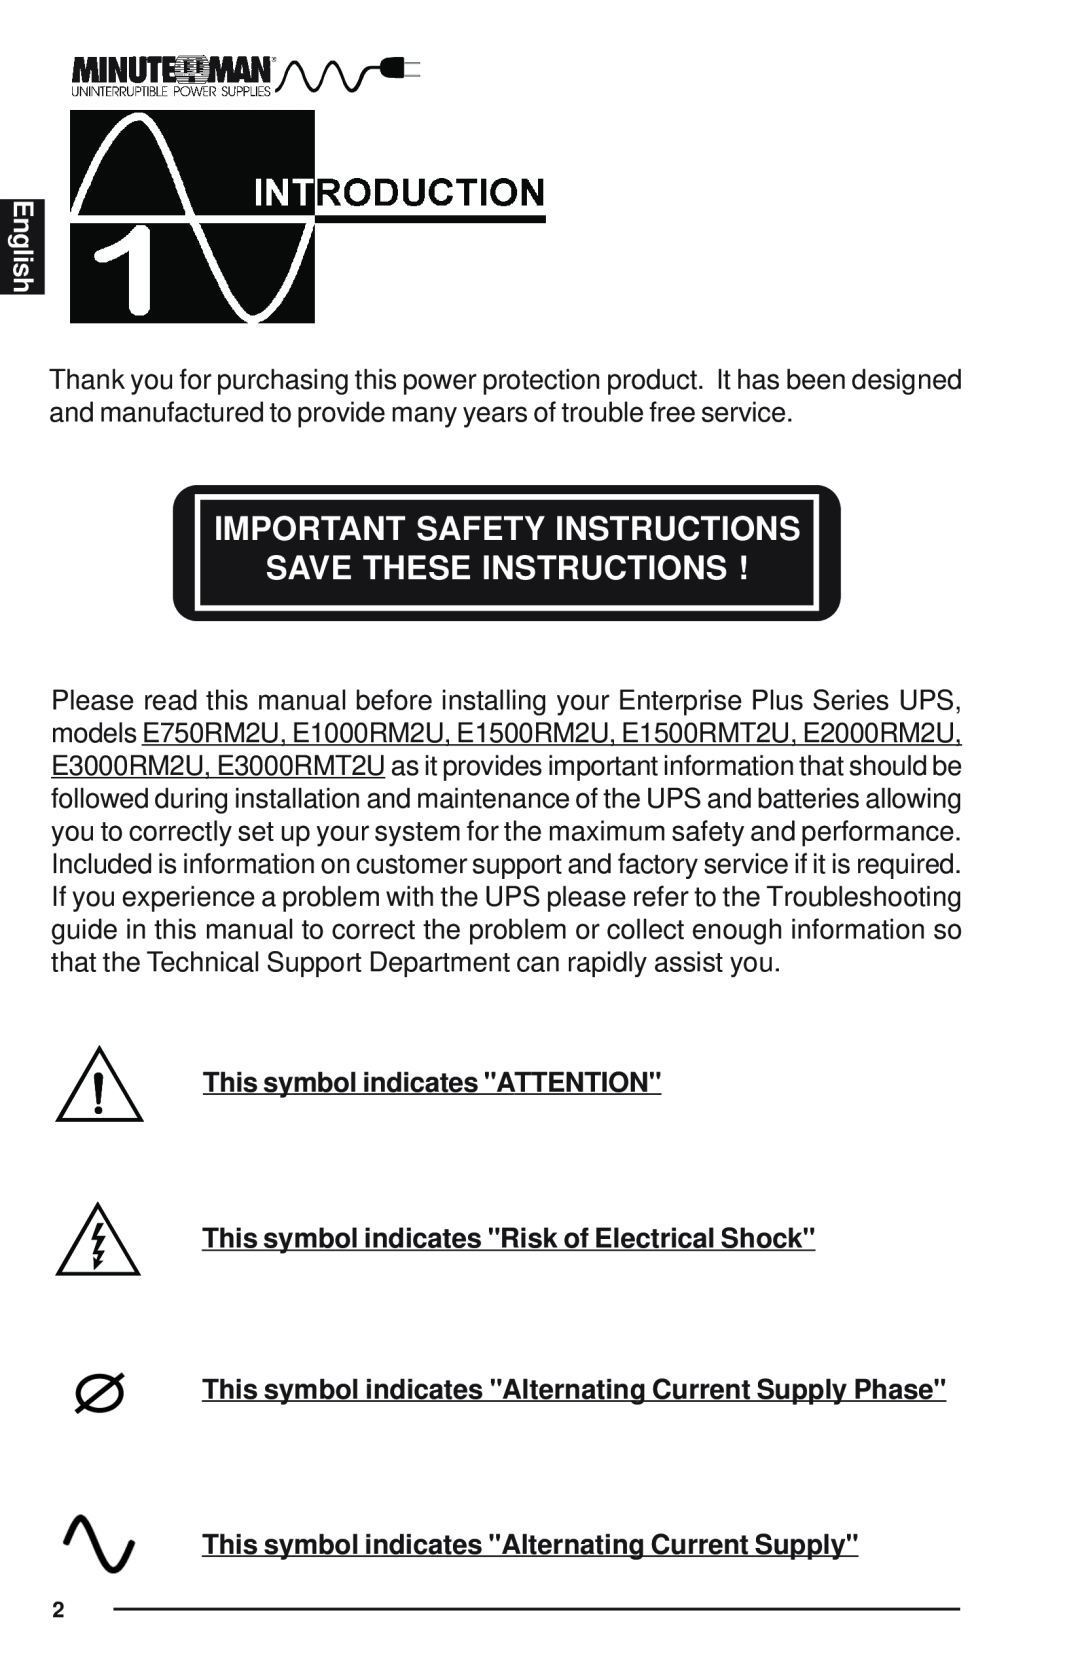 Minuteman UPS Enterprise Plus Series user manual Important Safety Instructions Save These Instructions, English 